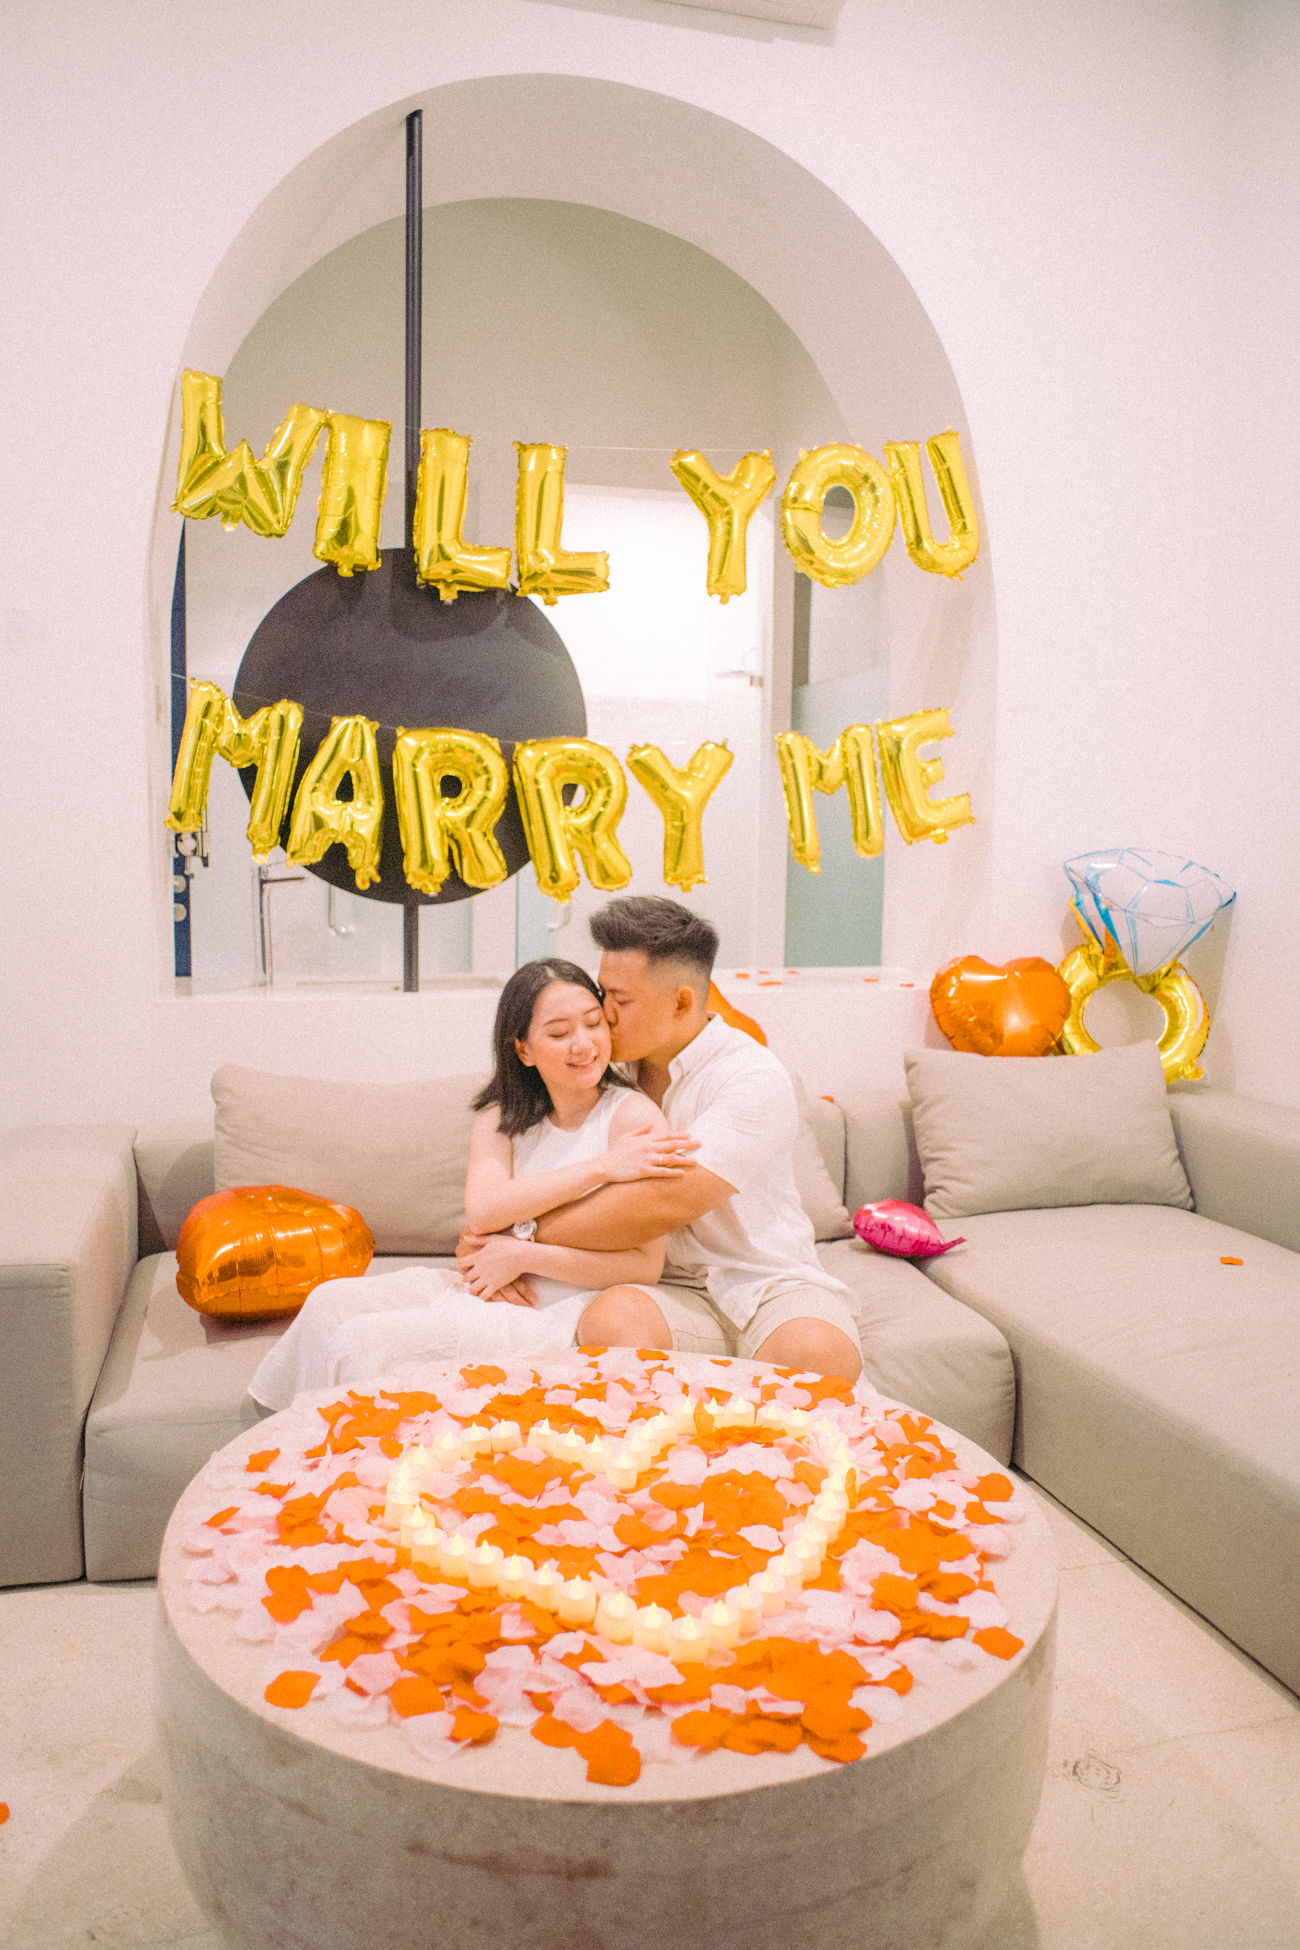 The man kiss the women in front of the sofa on pre-wedding proposal photo session